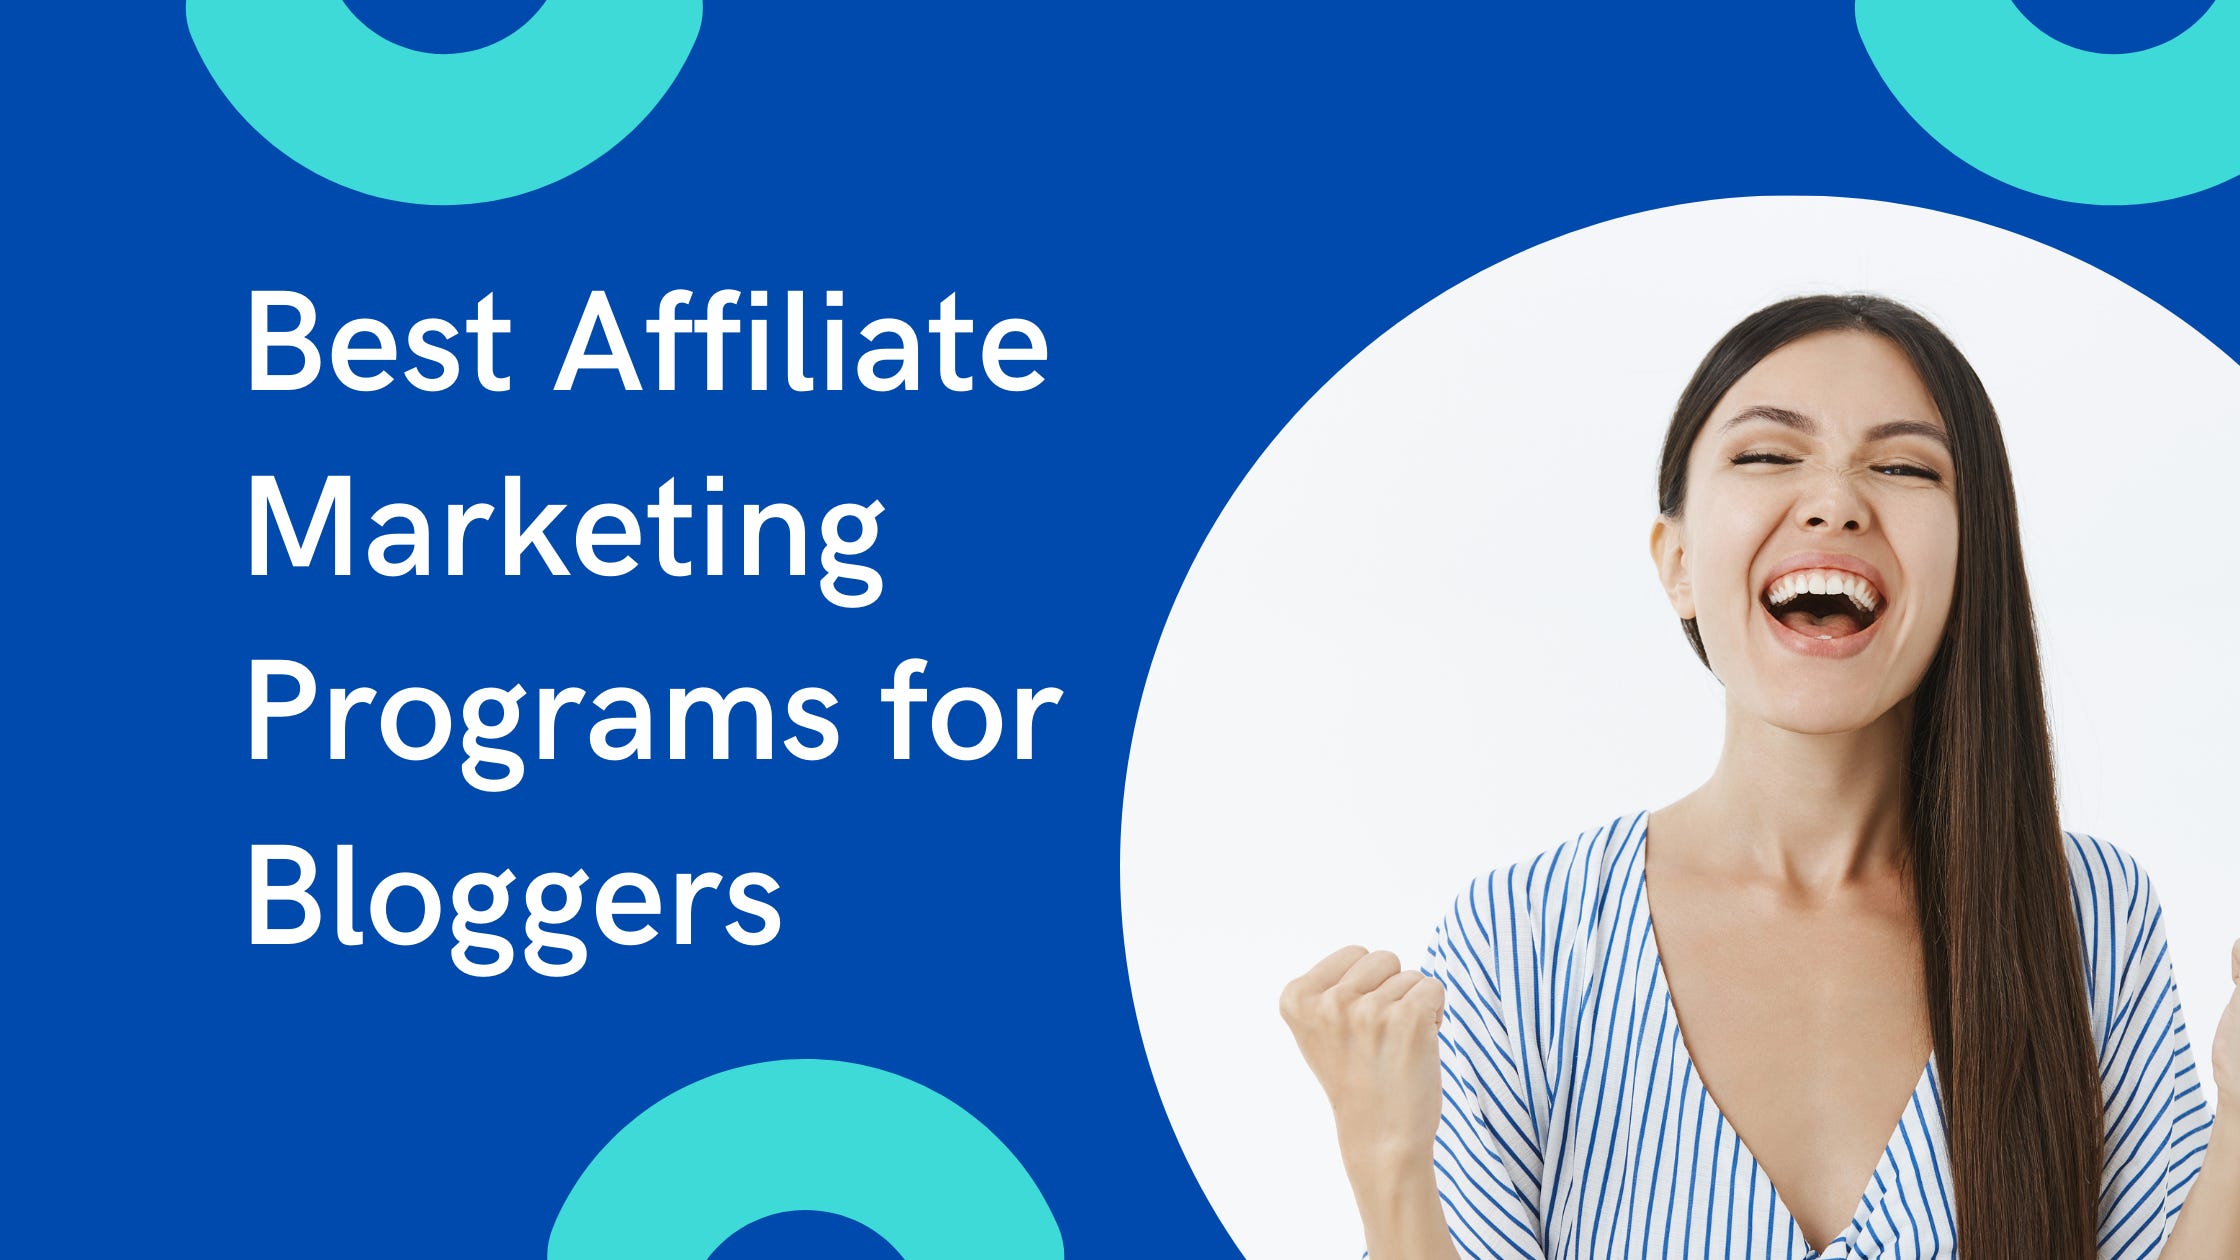 How to Set Up an Affiliate Program With WordPress